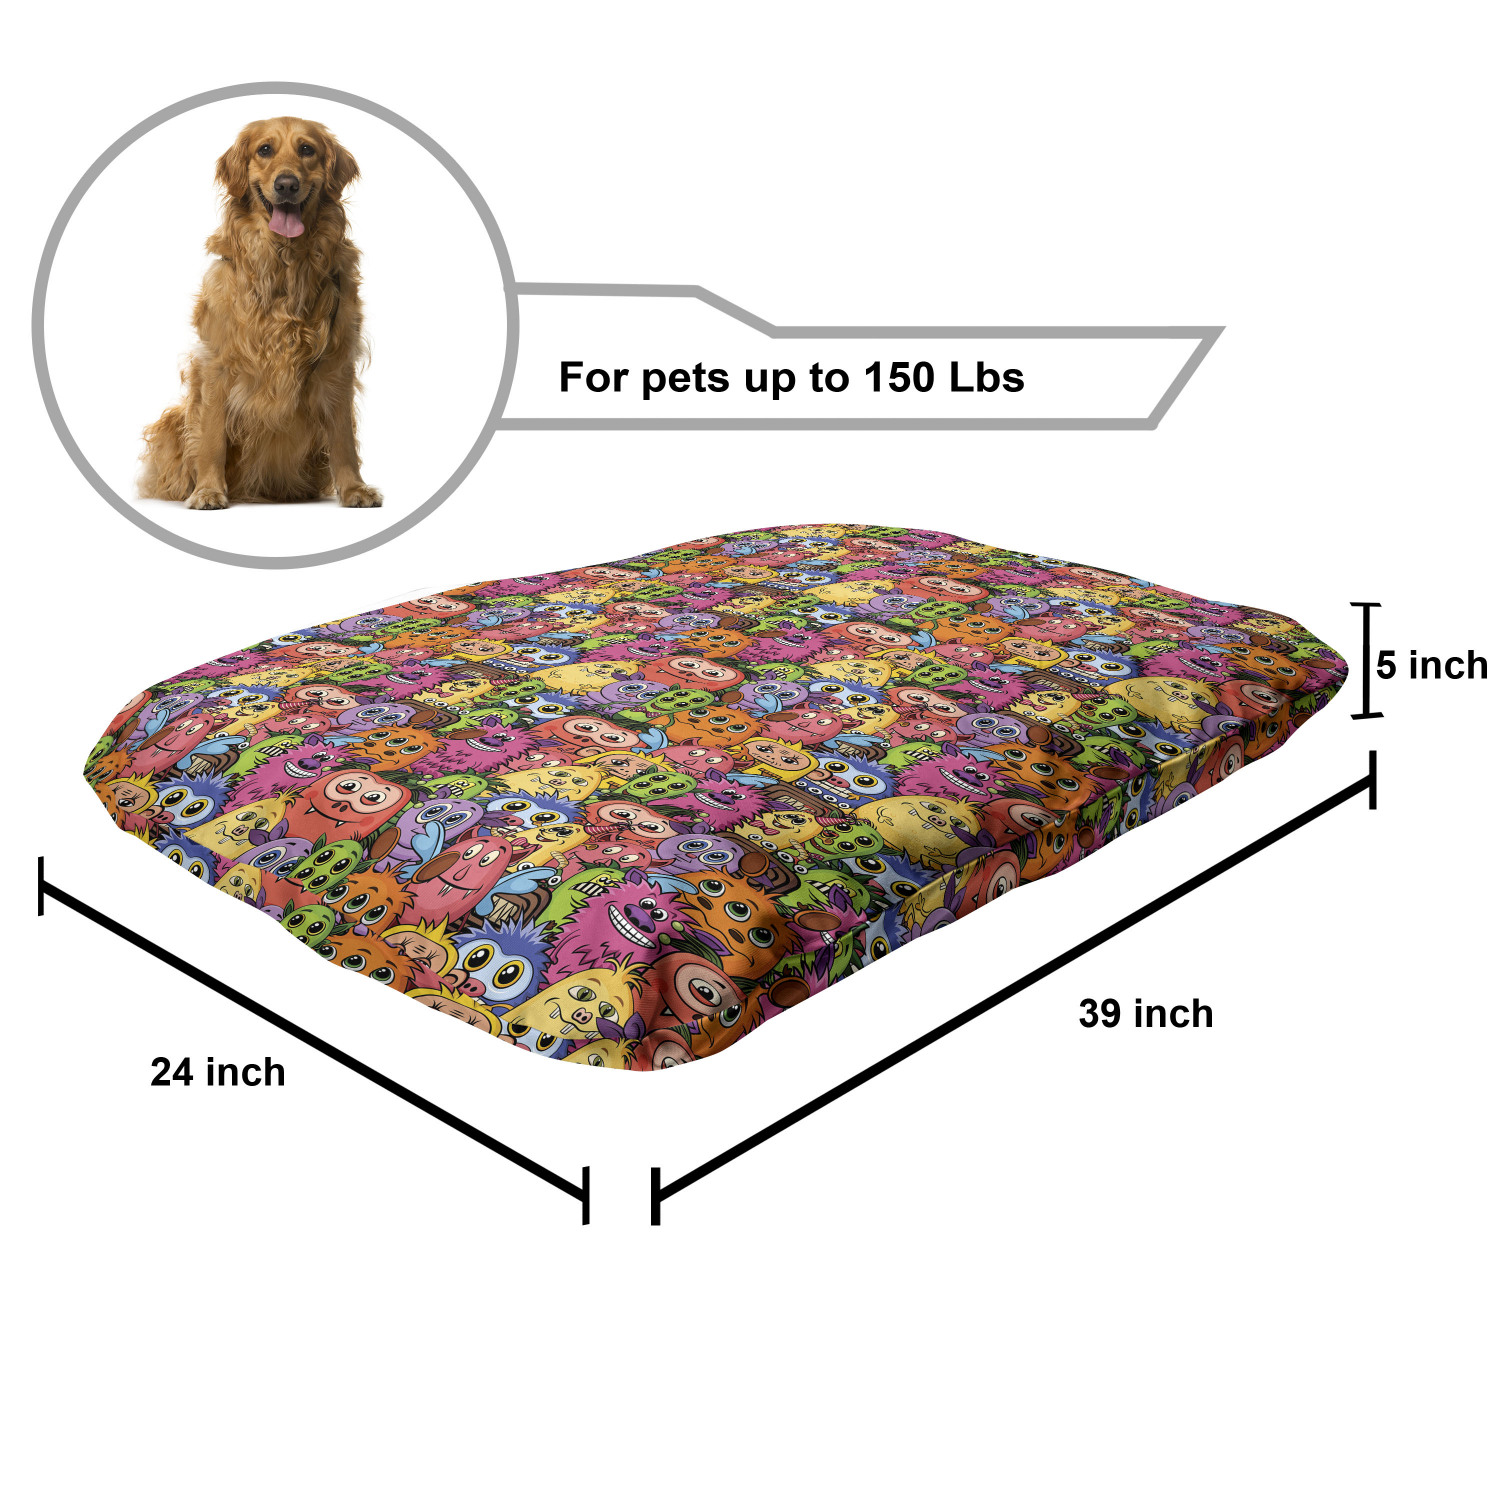 Alien Pet Bed, Carnival of Beasts Cartoon Monsters with Different Art Styles out of This World Theme, Resistant Pad for Dogs and Cats Cushion with Removable Cover, 24" x 39", Multicolor, by Ambesonne - image 2 of 4